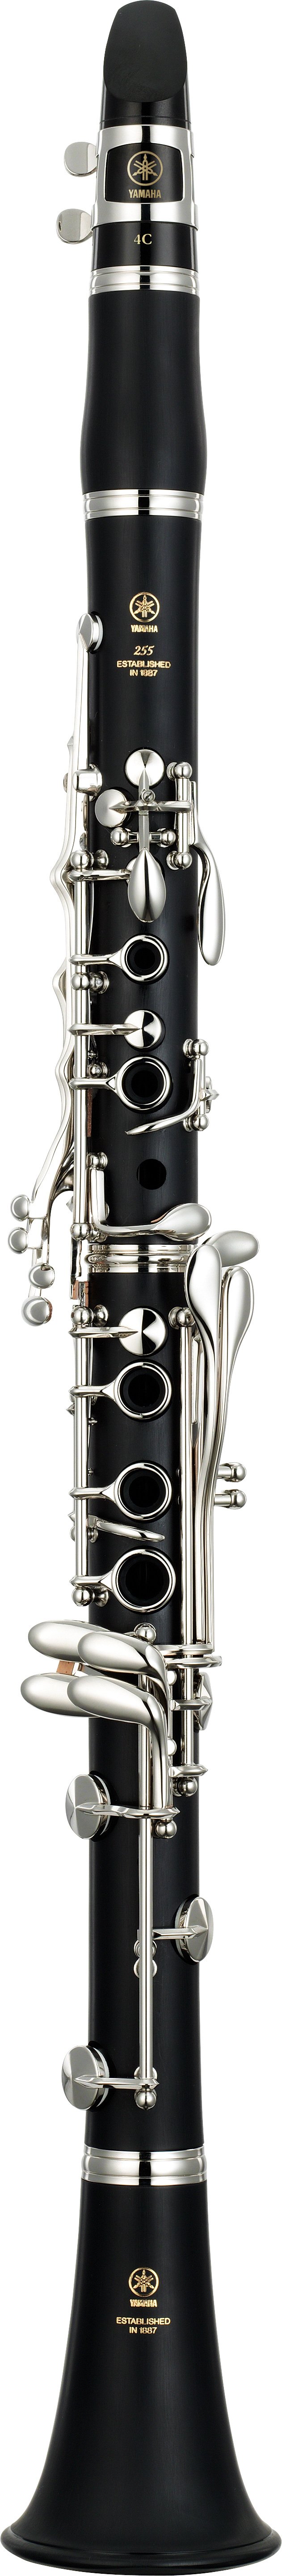 YCL-255/255S - Overview - Clarinets - Brass & Woodwinds - Musical 